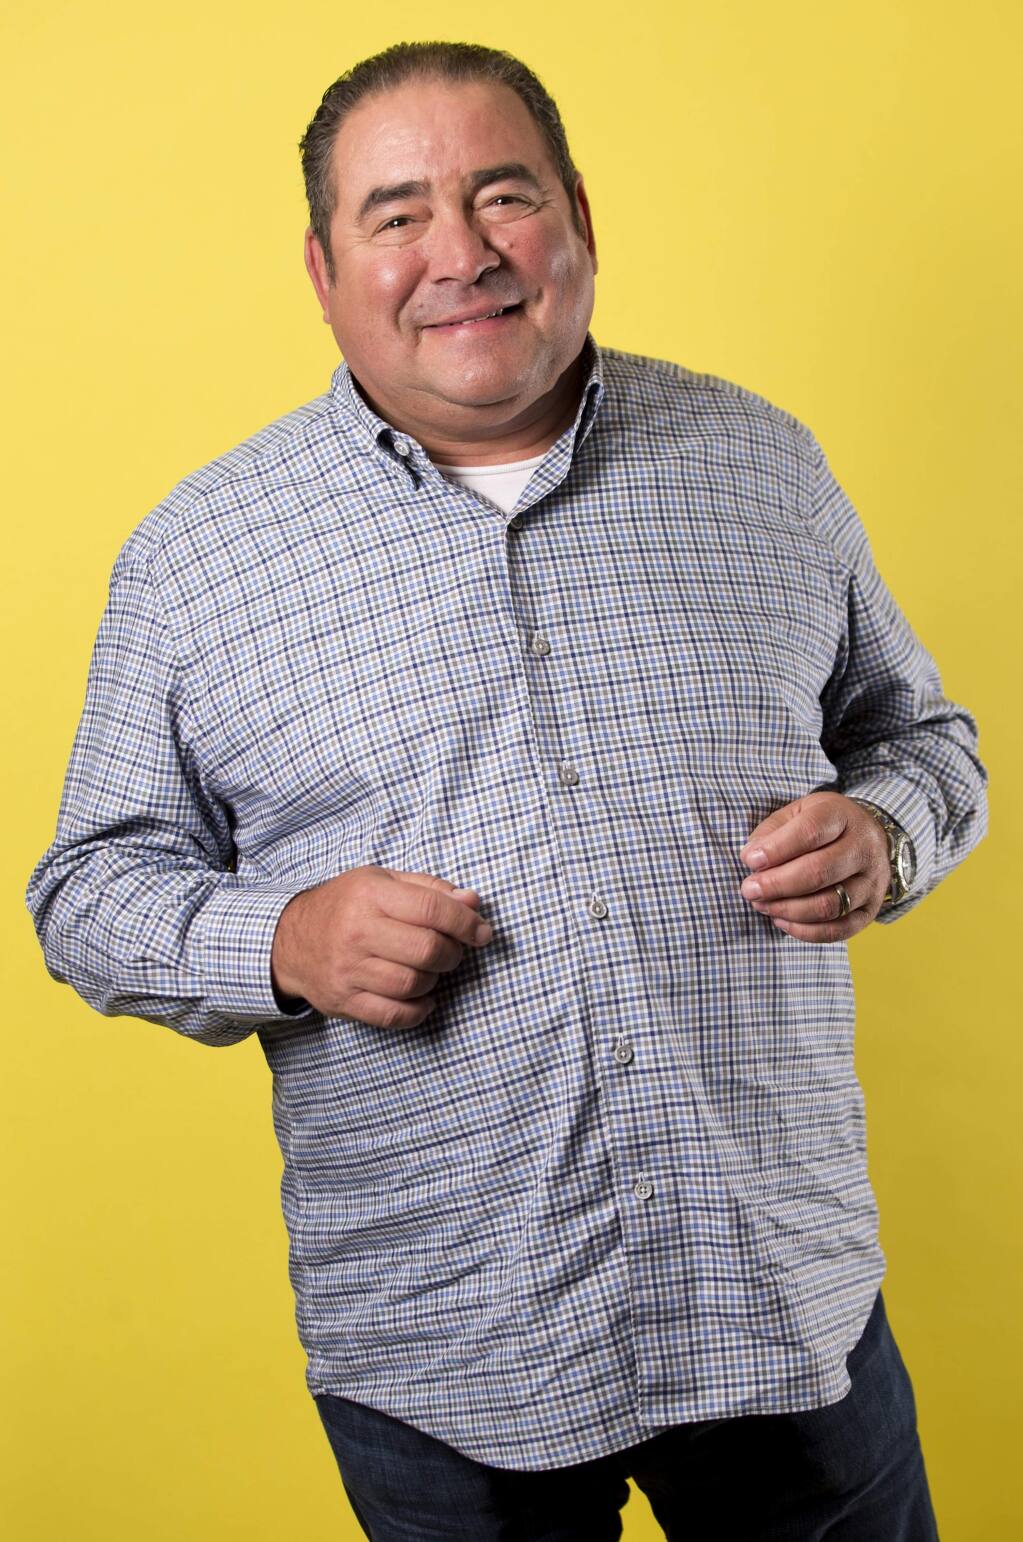 In this Aug. 23, 2016 photo, Emeril Lagasse poses for a portrait in promotion of his new television show ‘Eat the World' in New York. The six-part Amazon Prime series is available for streaming Friday, Sept. 2. (Photo by Brian Ach/Invision/AP)